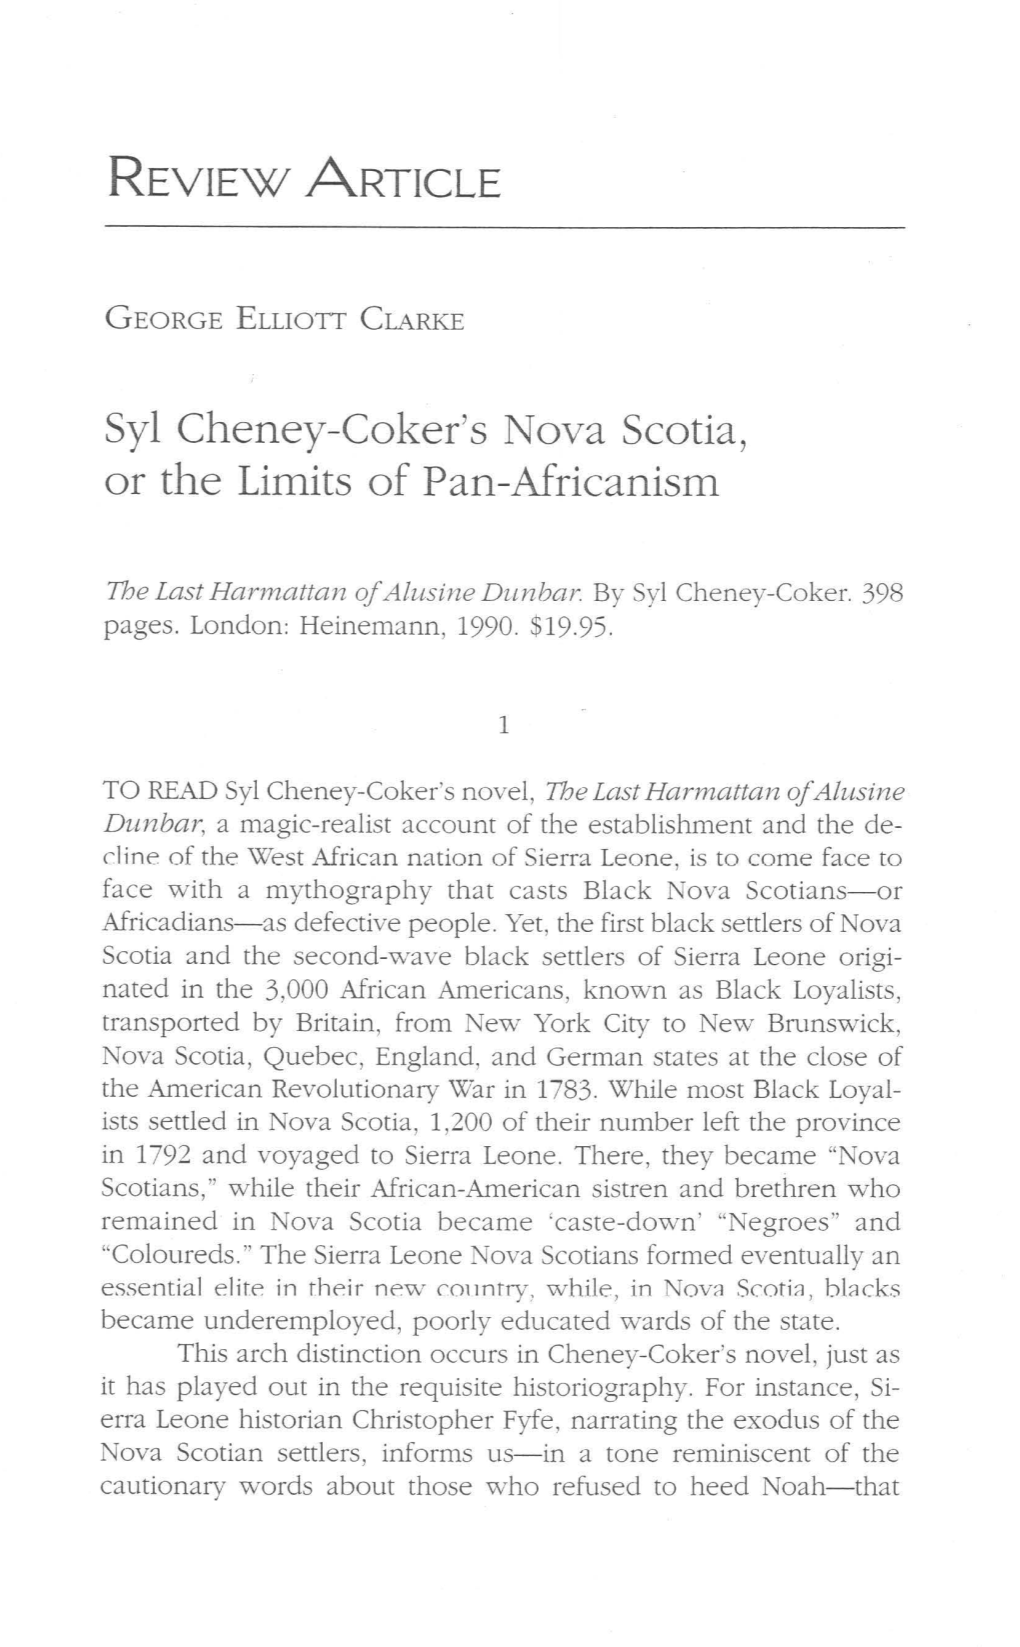 Syl Cheney-Coker's Nova Scotia, Or the Limits of Pan-Africanism